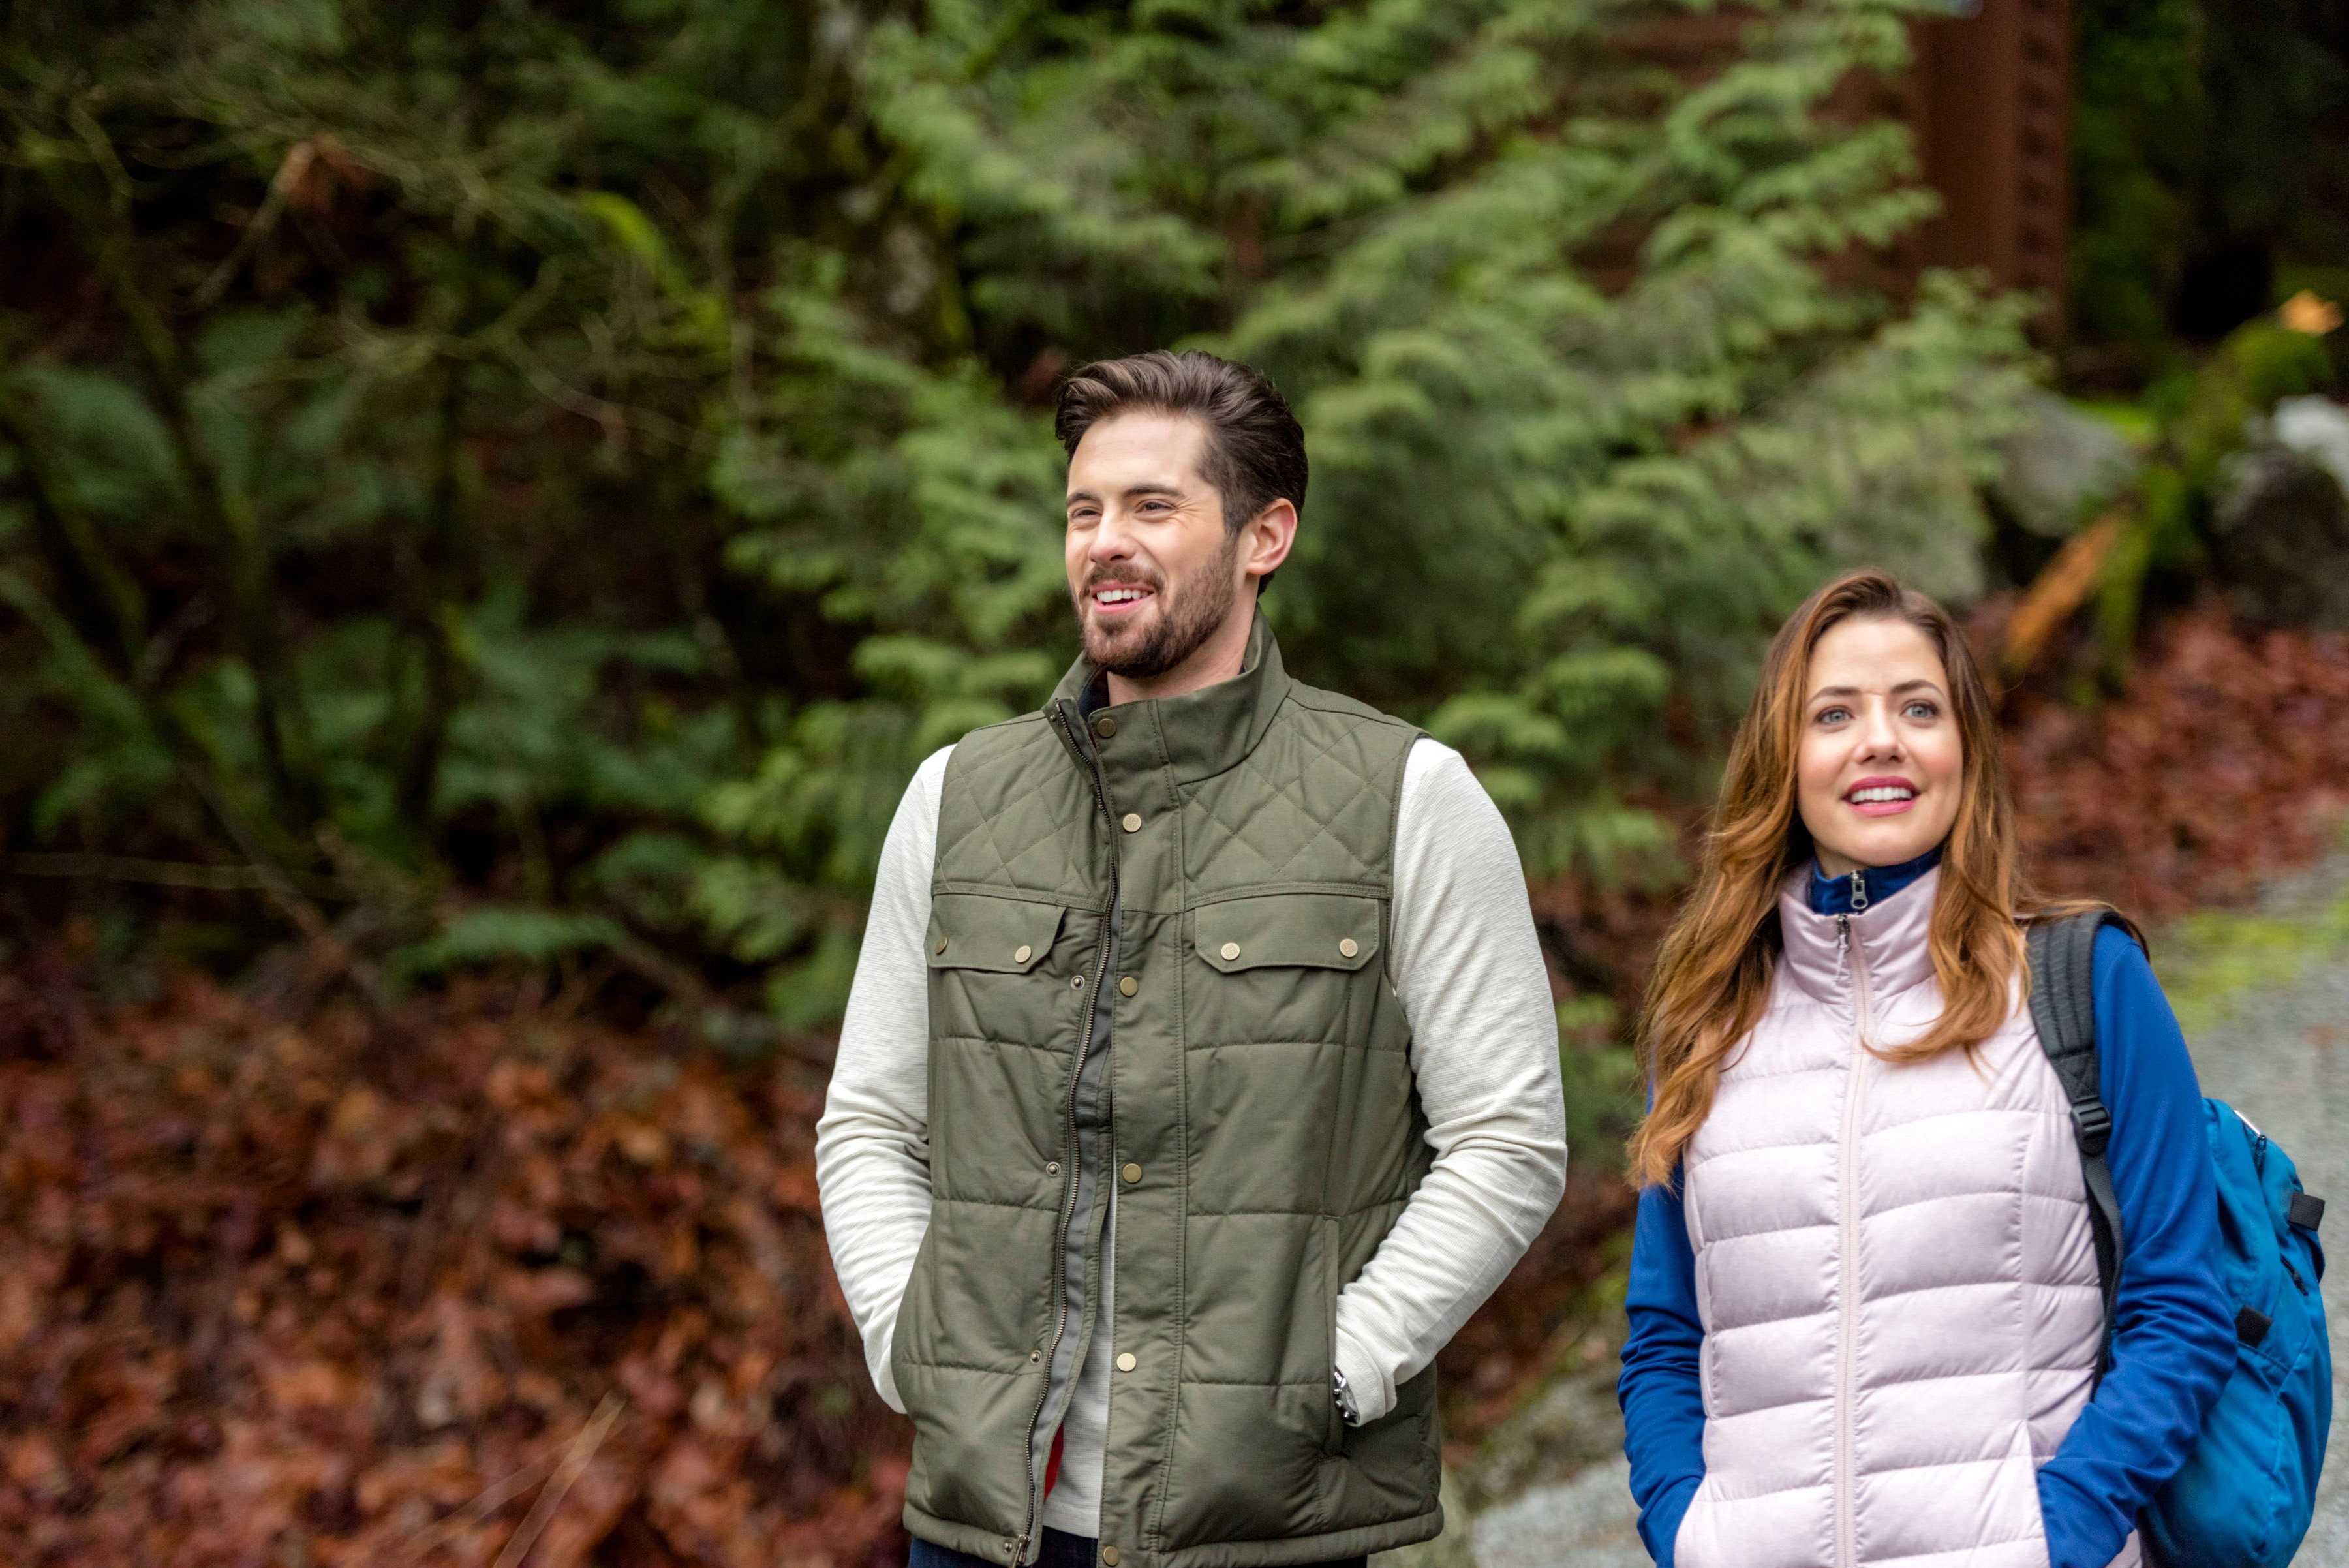 Chris McNally and Julie Gonzalo, both wearing outdoor attire, in the 2018 Hallmark movie 'The Sweetest Heart'